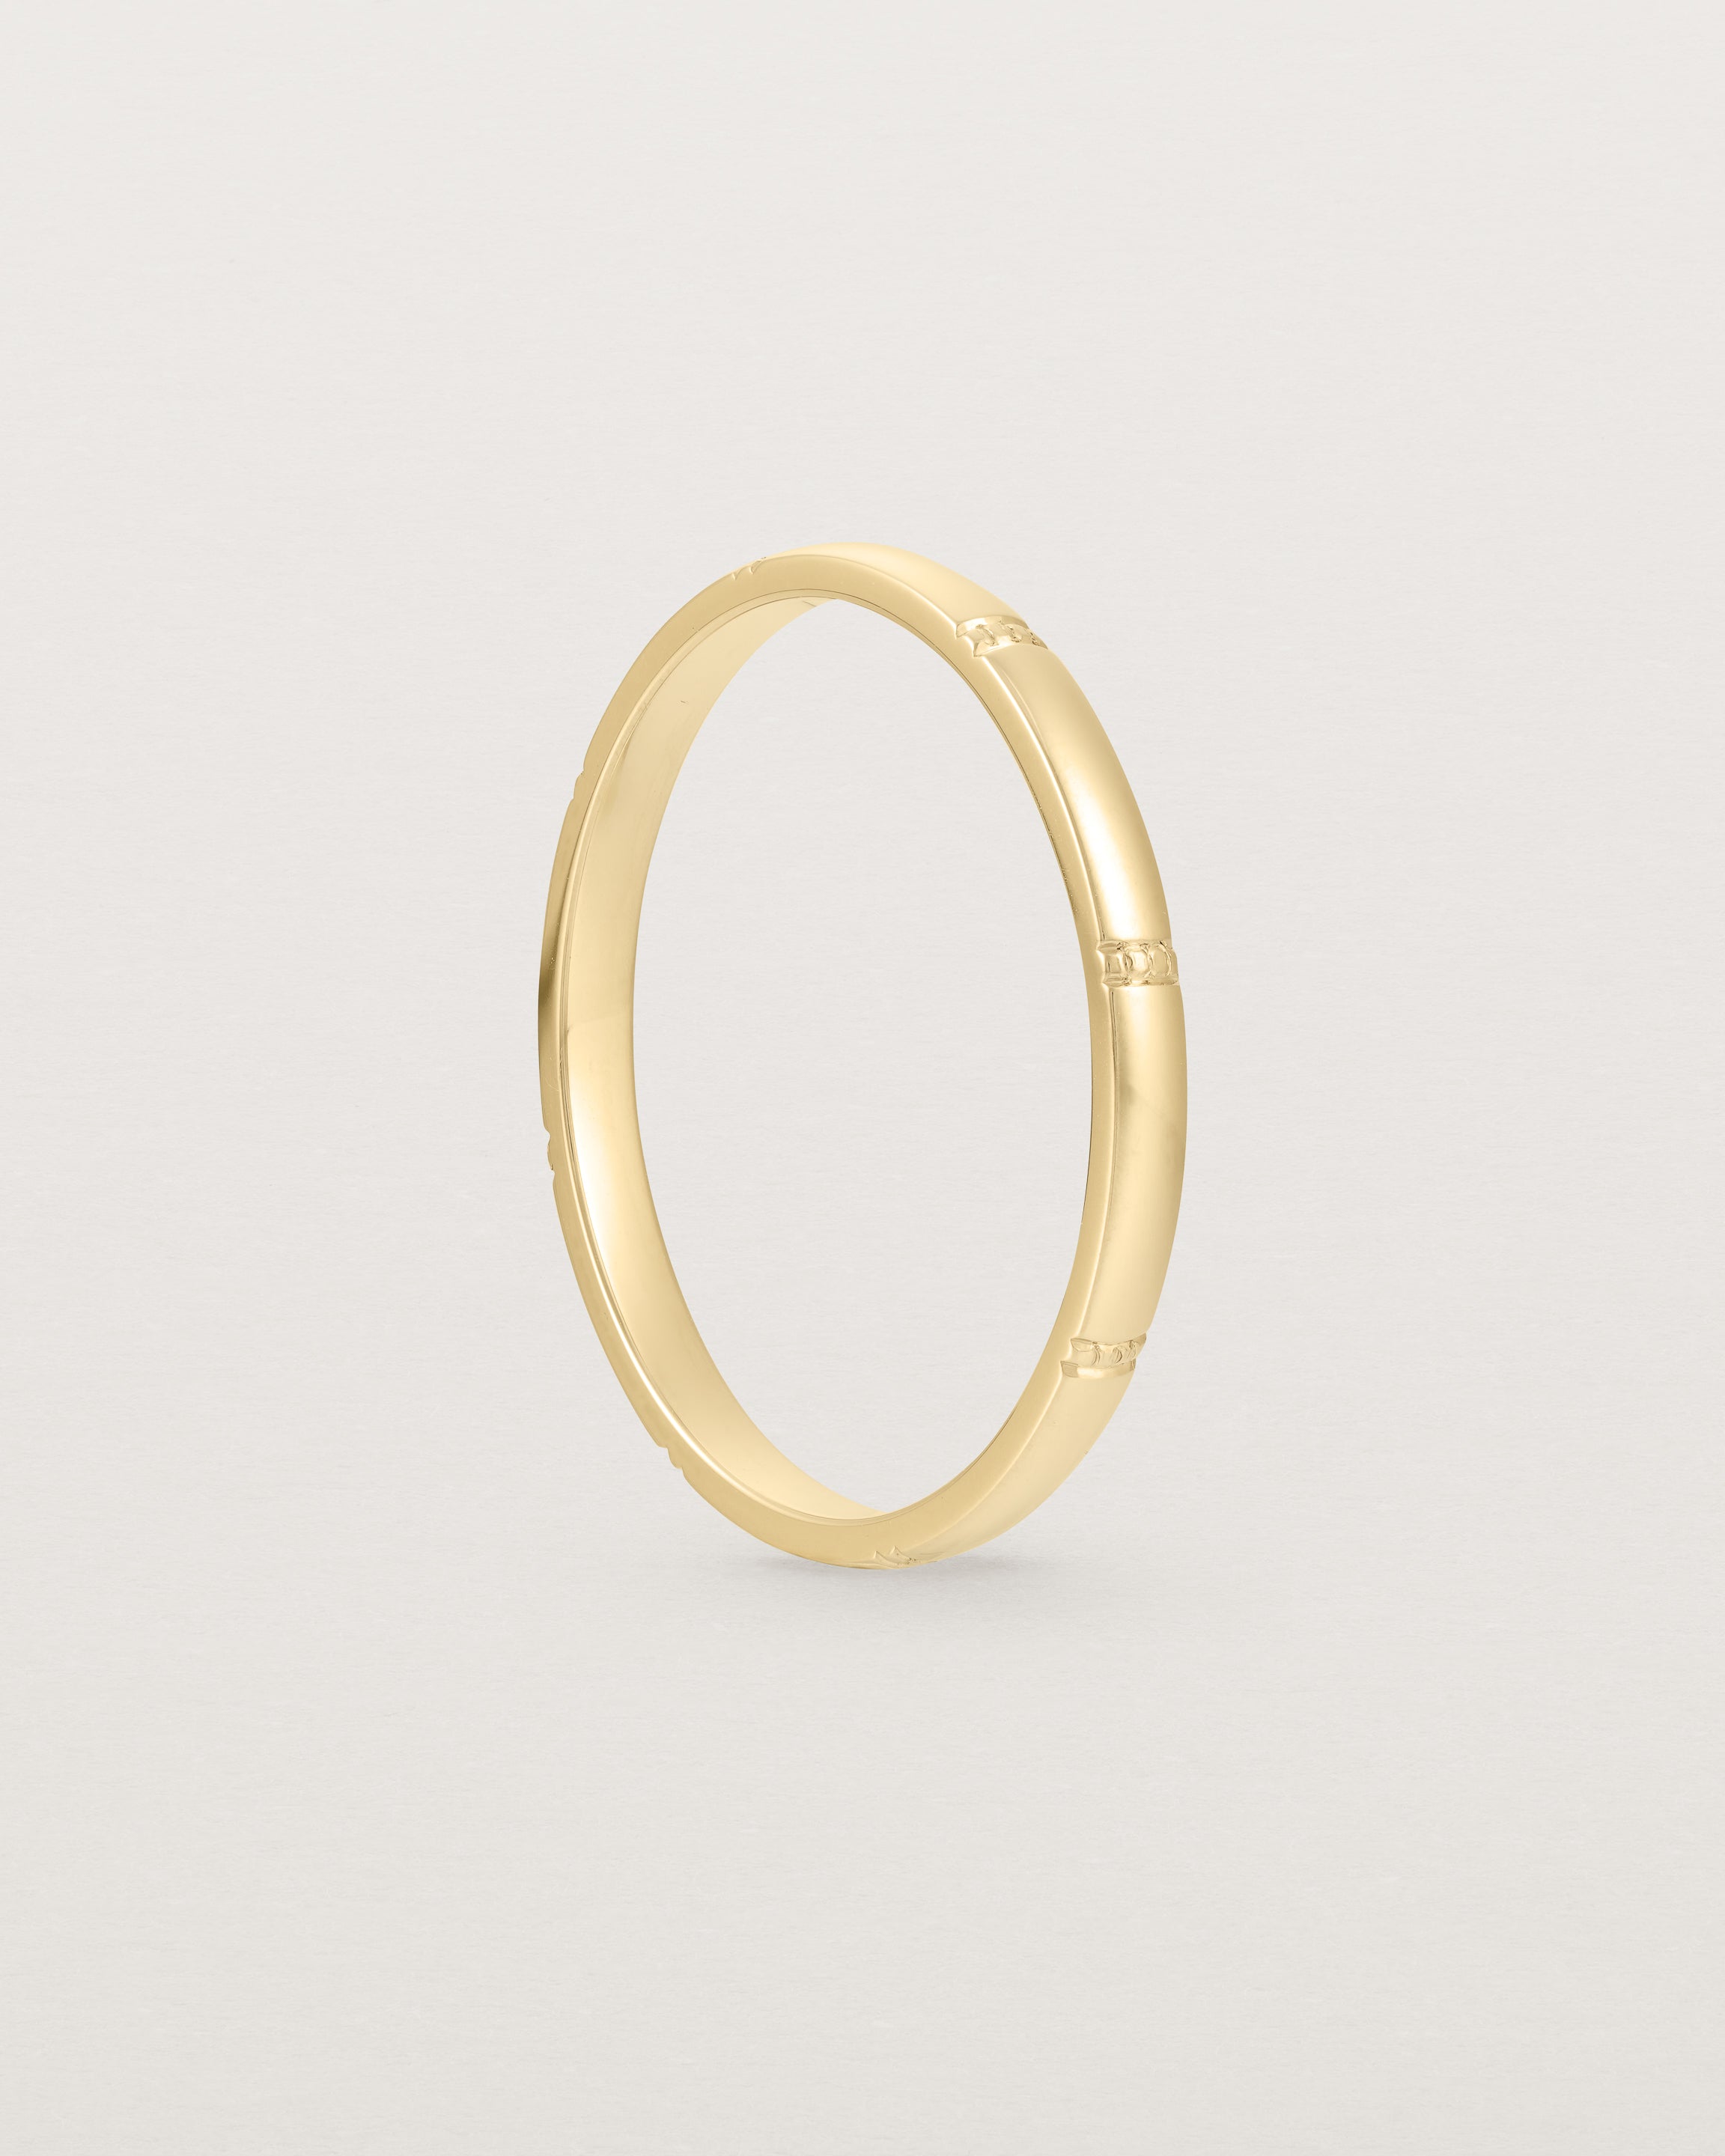 Standing view of the Grain Wedding Ring | 2mm | Yellow Gold.